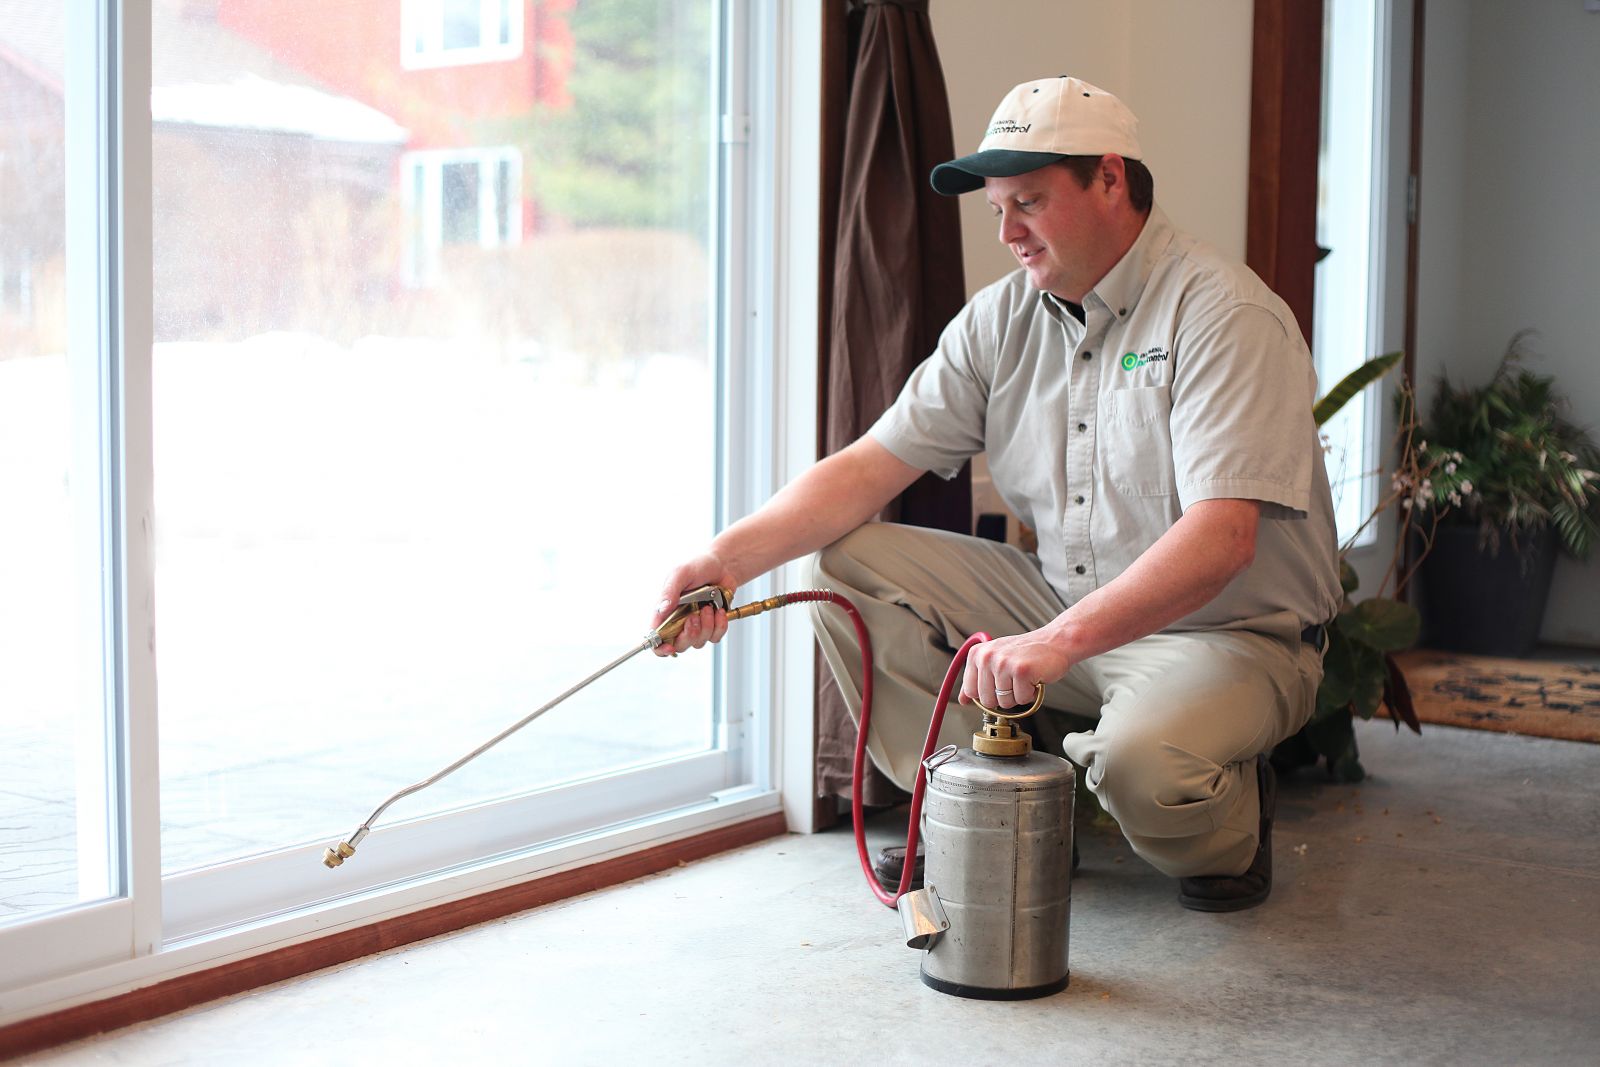 Pests Be Gone: Effective Pest Control Methods for Every Situation